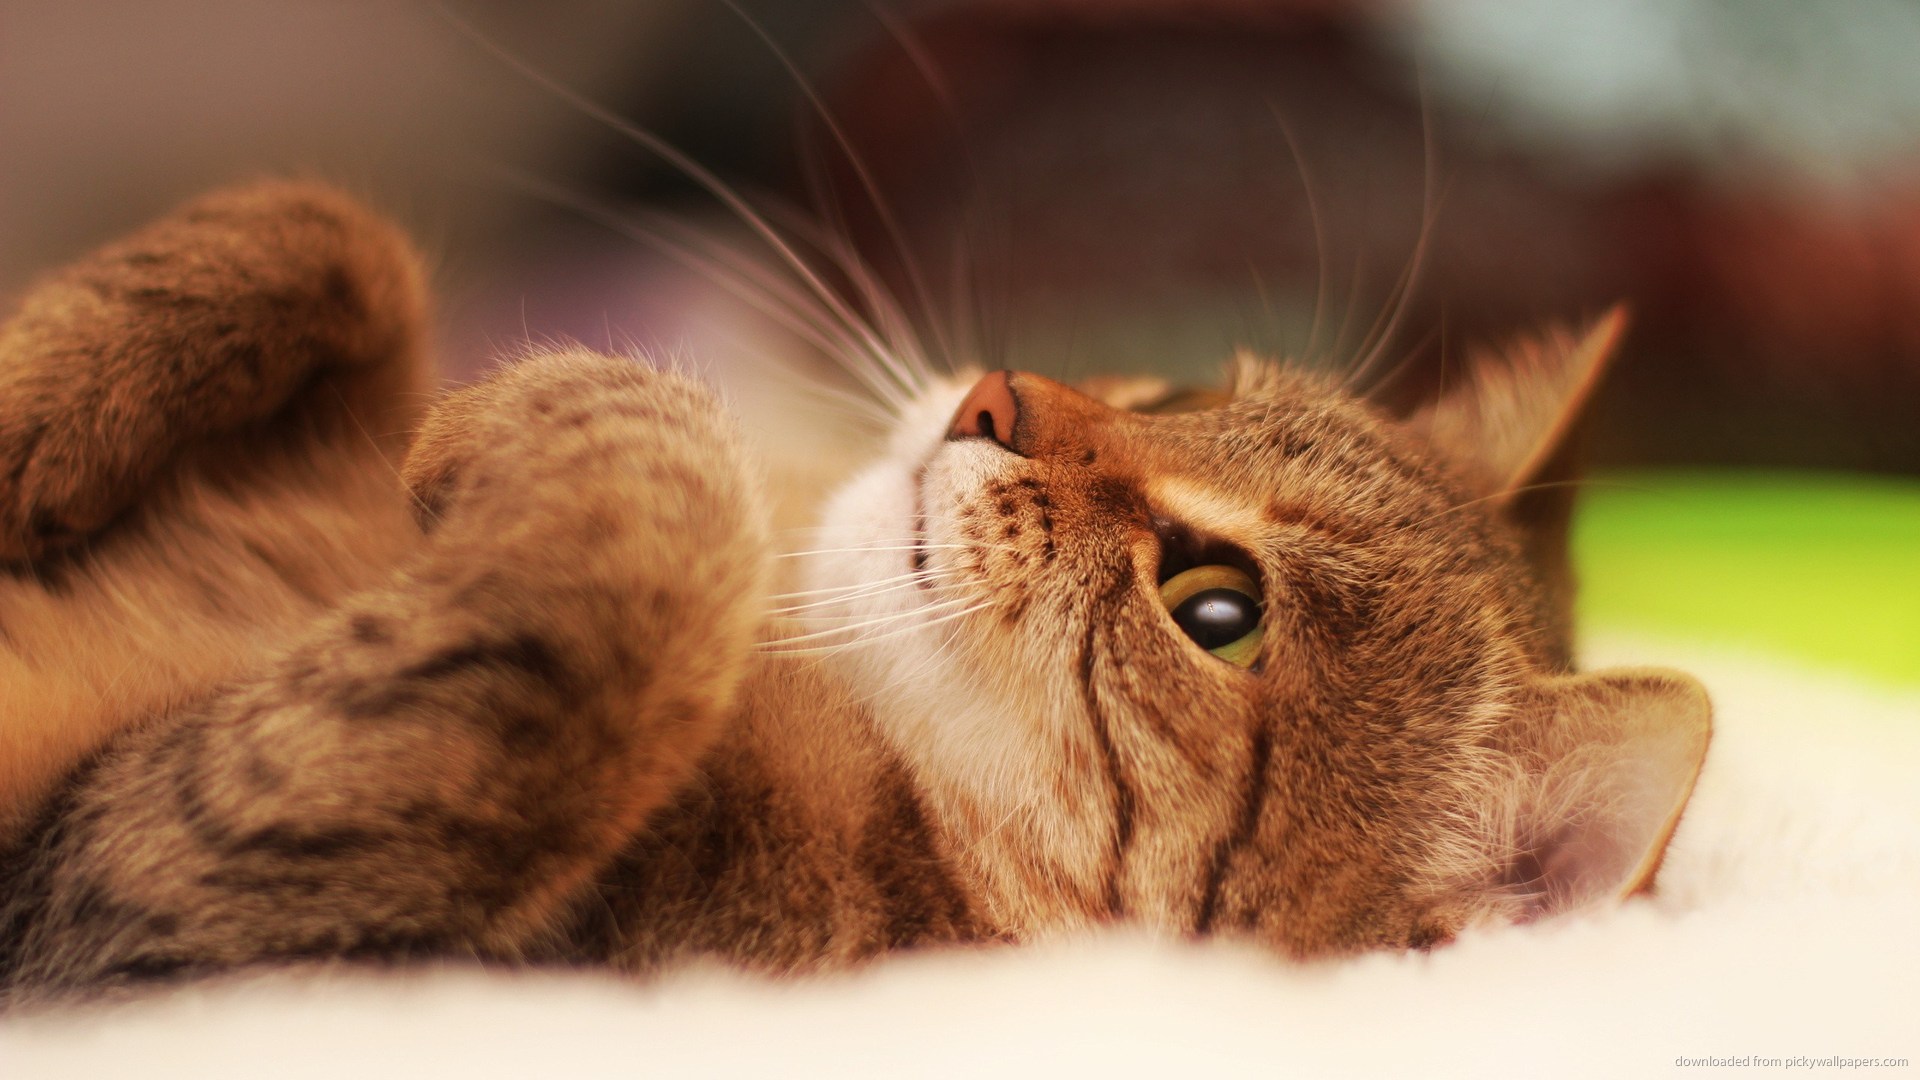 ... Adorable Cat with Brown Eyes Looking Up Wallpaper for 1920x1080